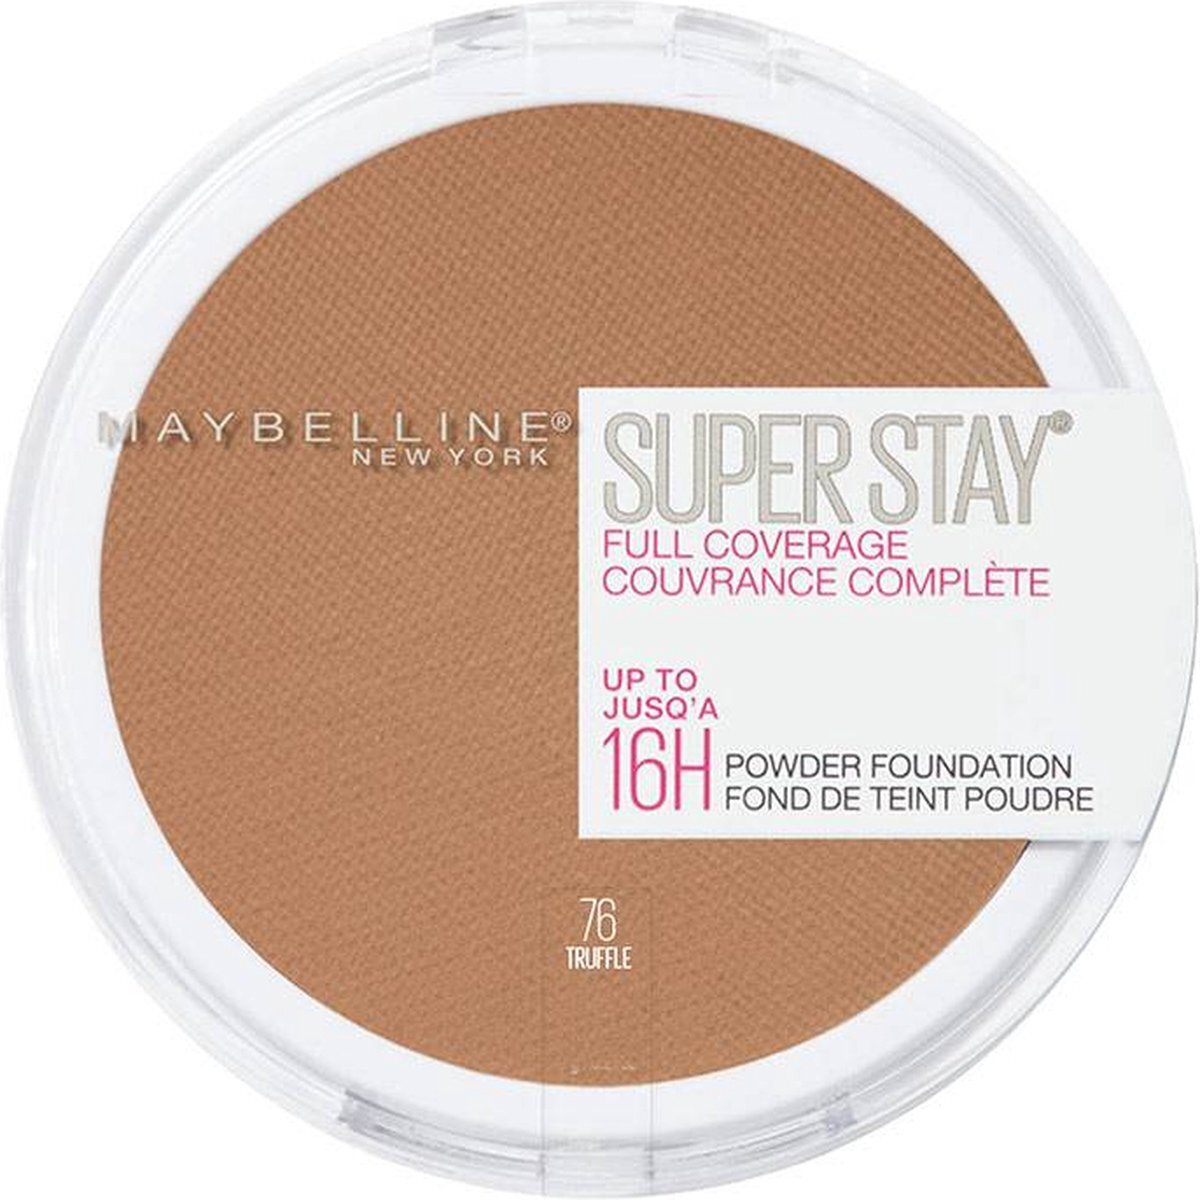 Maybelline SuperStay 16H Full Coverage Poeder Foundation - 76 Truffle